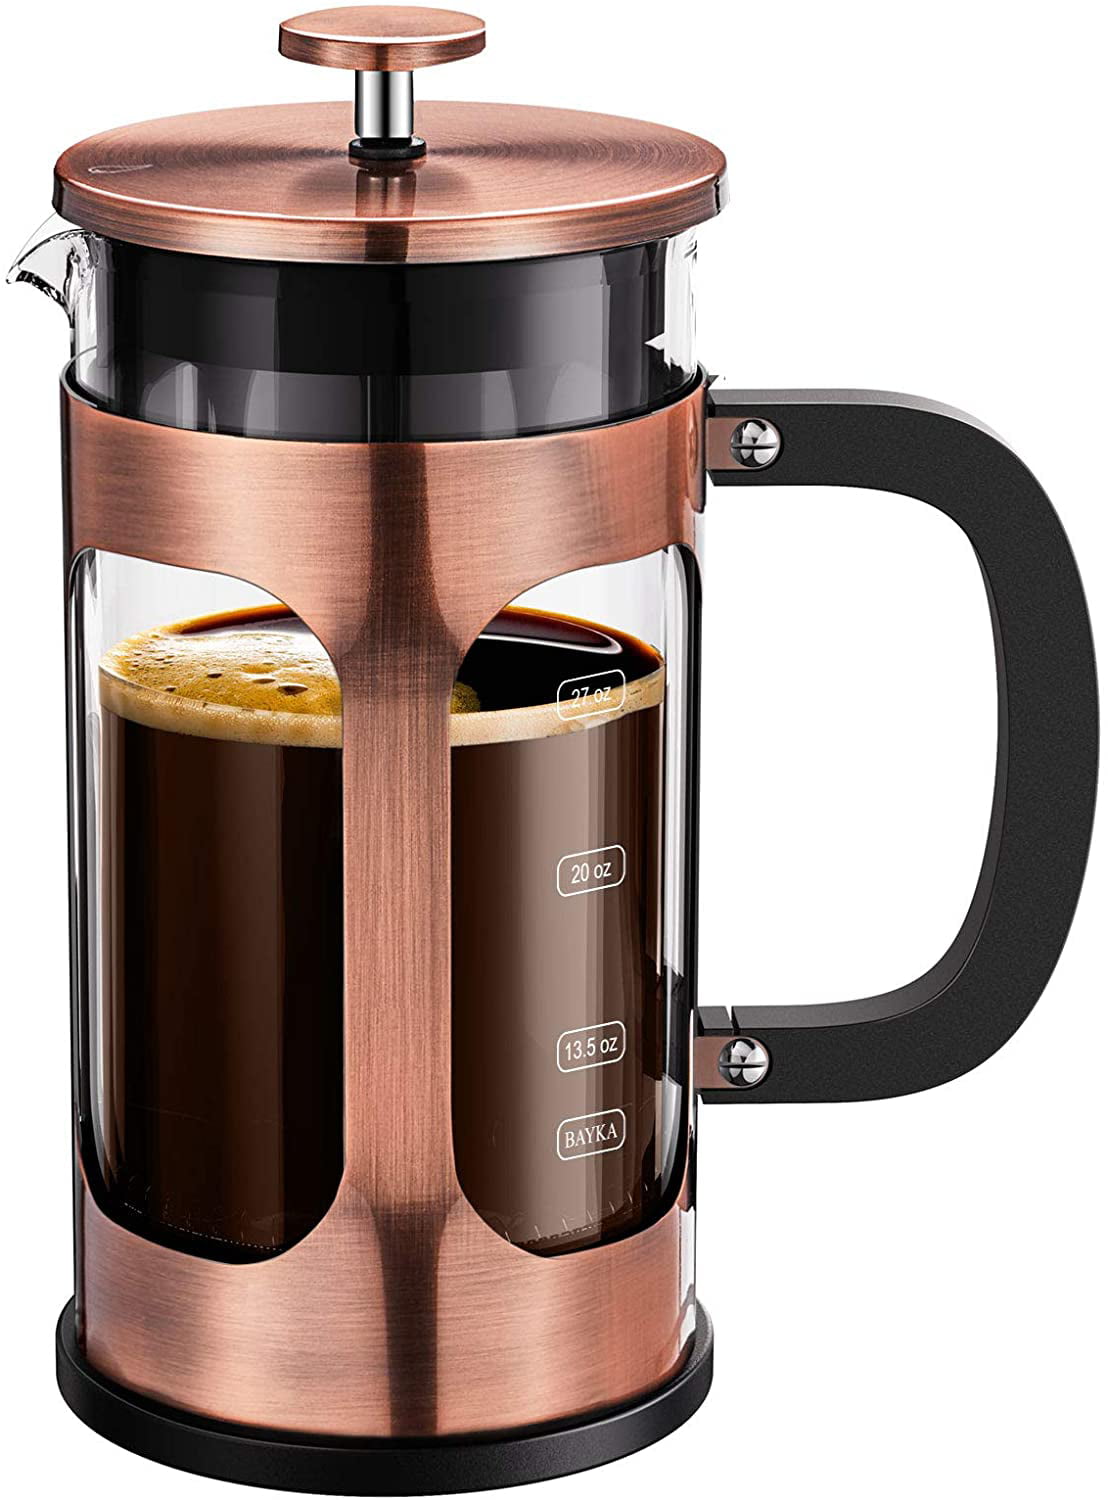 Mr. Coffee grinder and Bodum Chambord French Press. Both New in